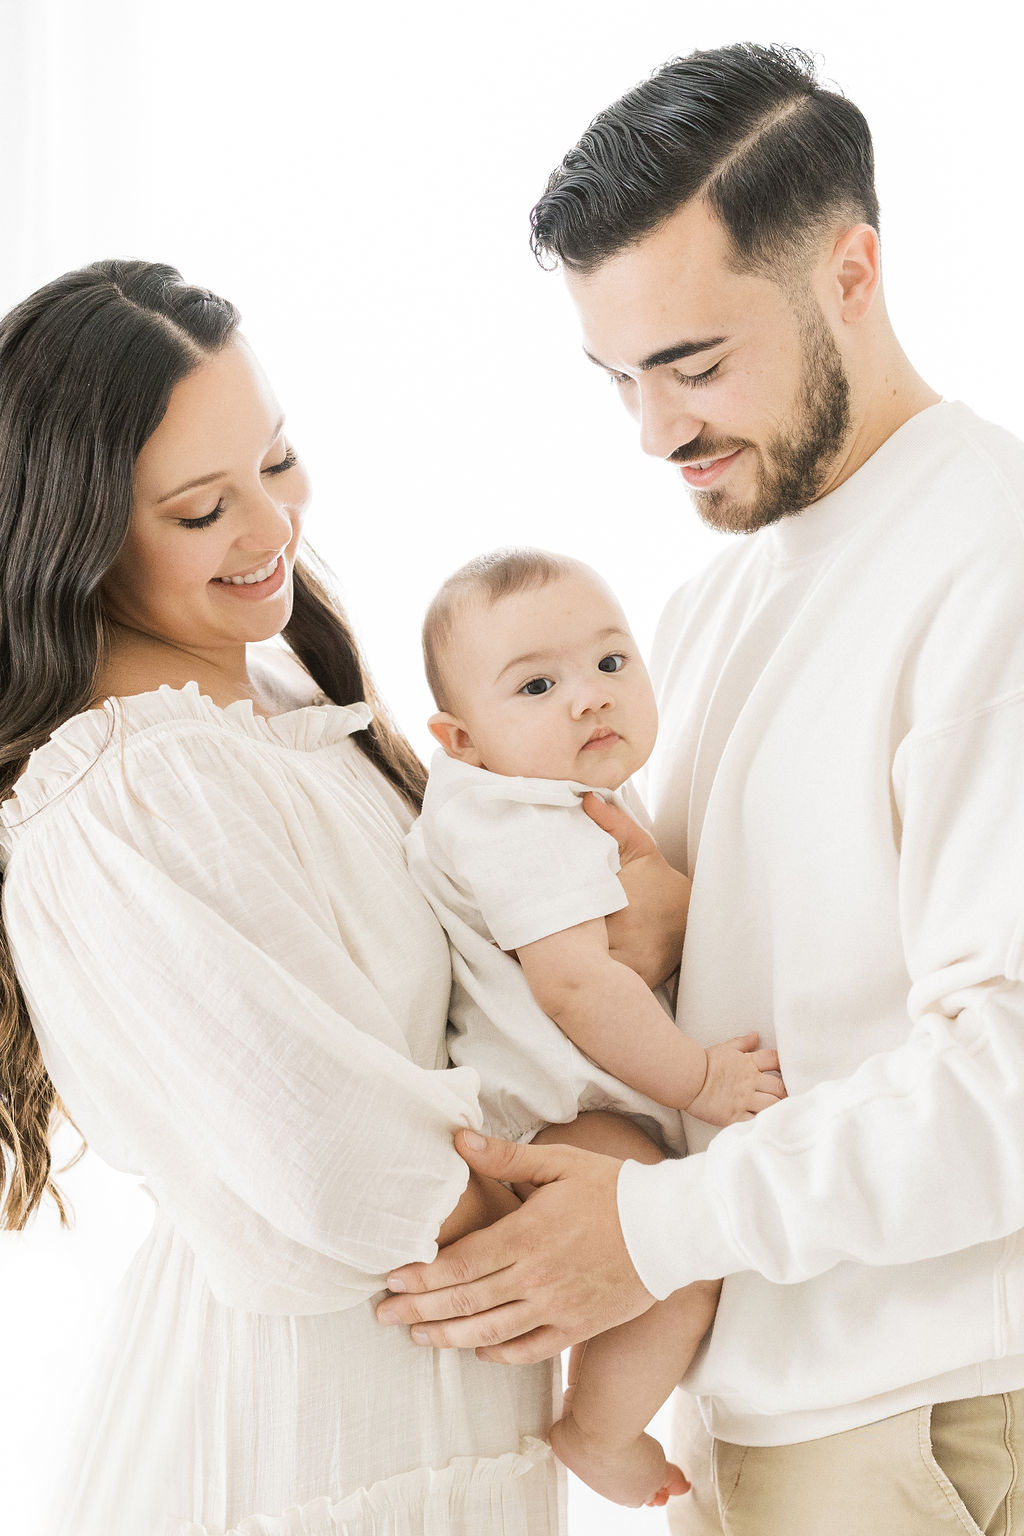 Mom and dad both in white hold their young son in between them